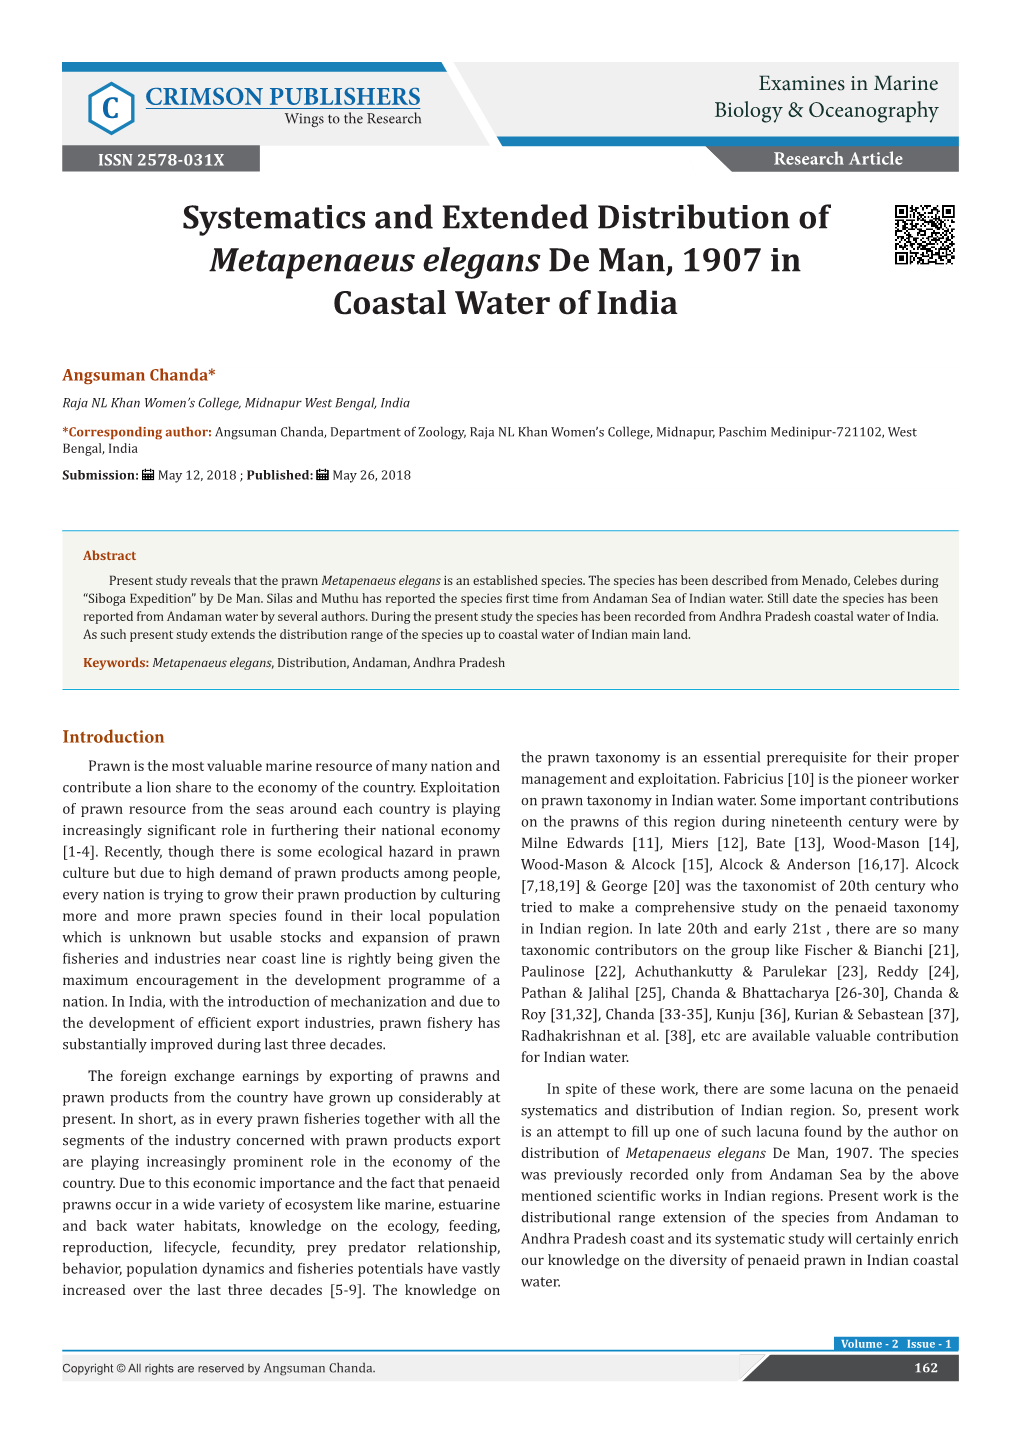 Systematics and Extended Distribution of Metapenaeus Elegans De Man, 1907 in Coastal Water of India